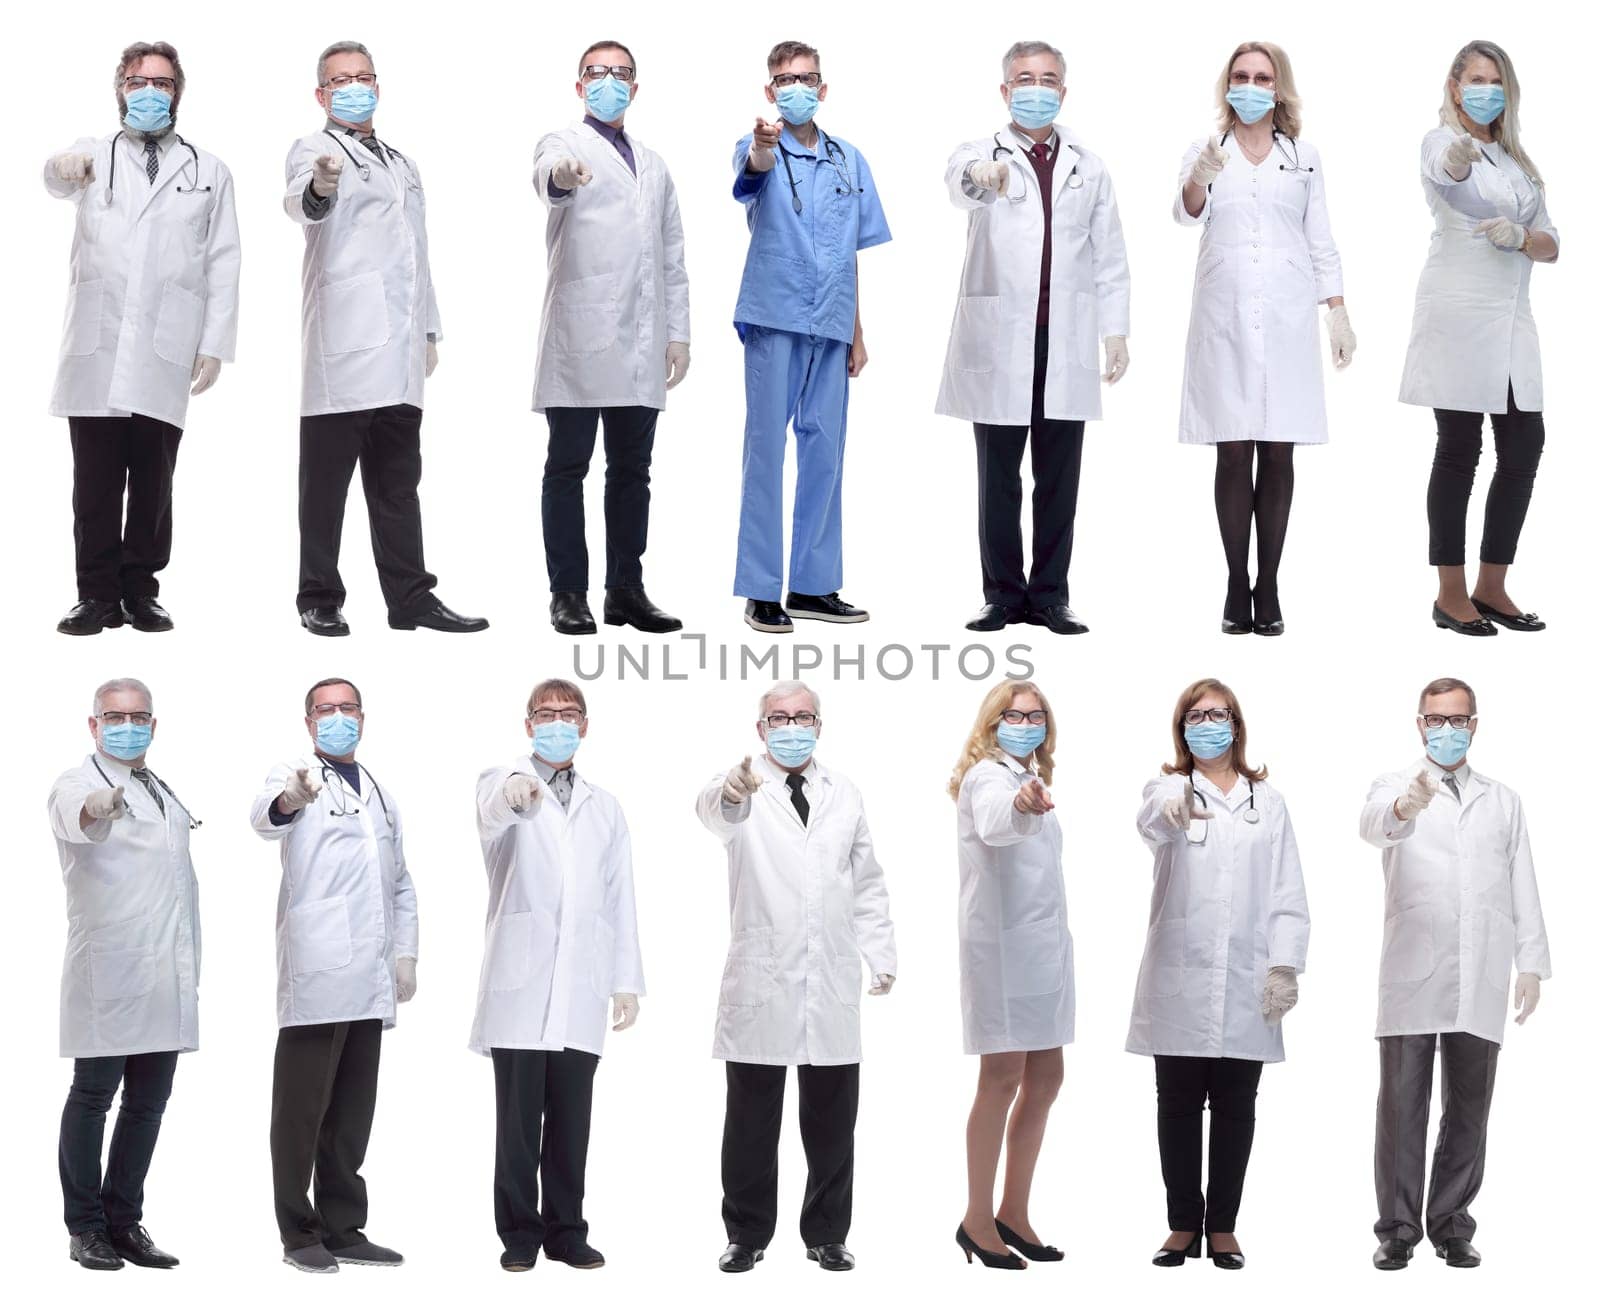 group of doctors in mask isolated on white background